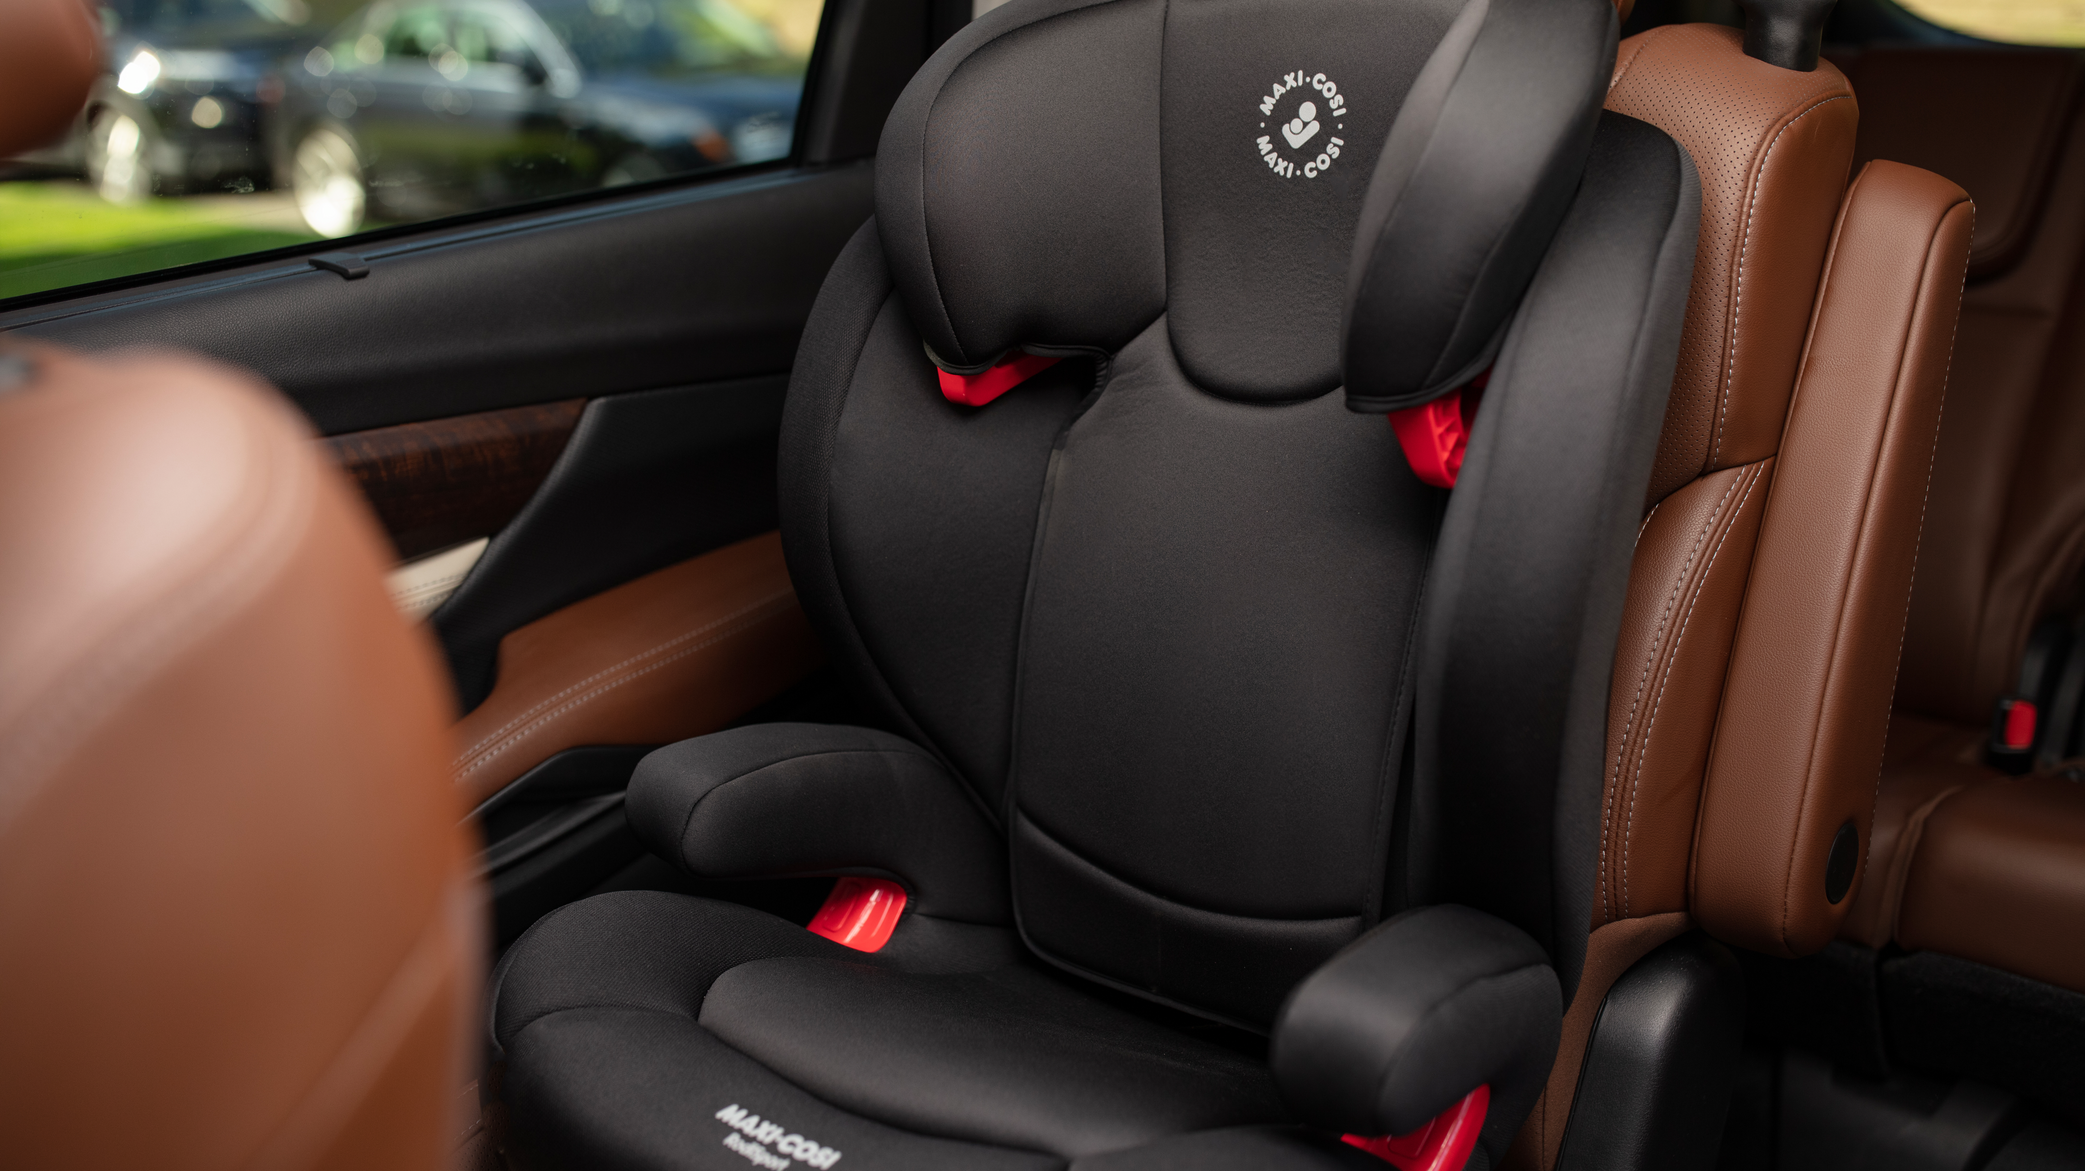 booster seat installed in car